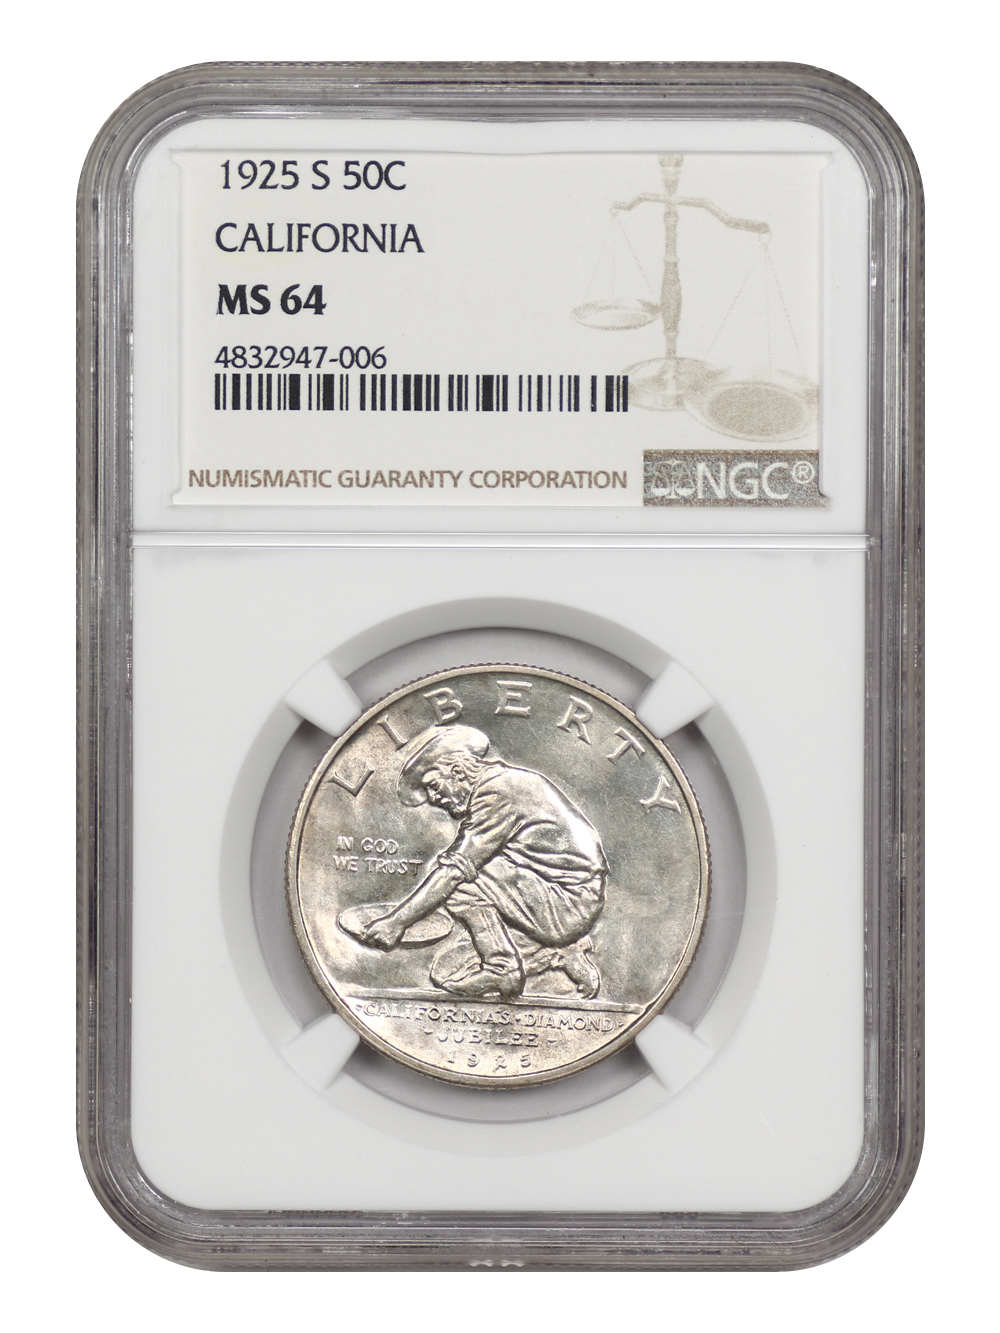 Primary image for 1925-S 50C California NGC MS64